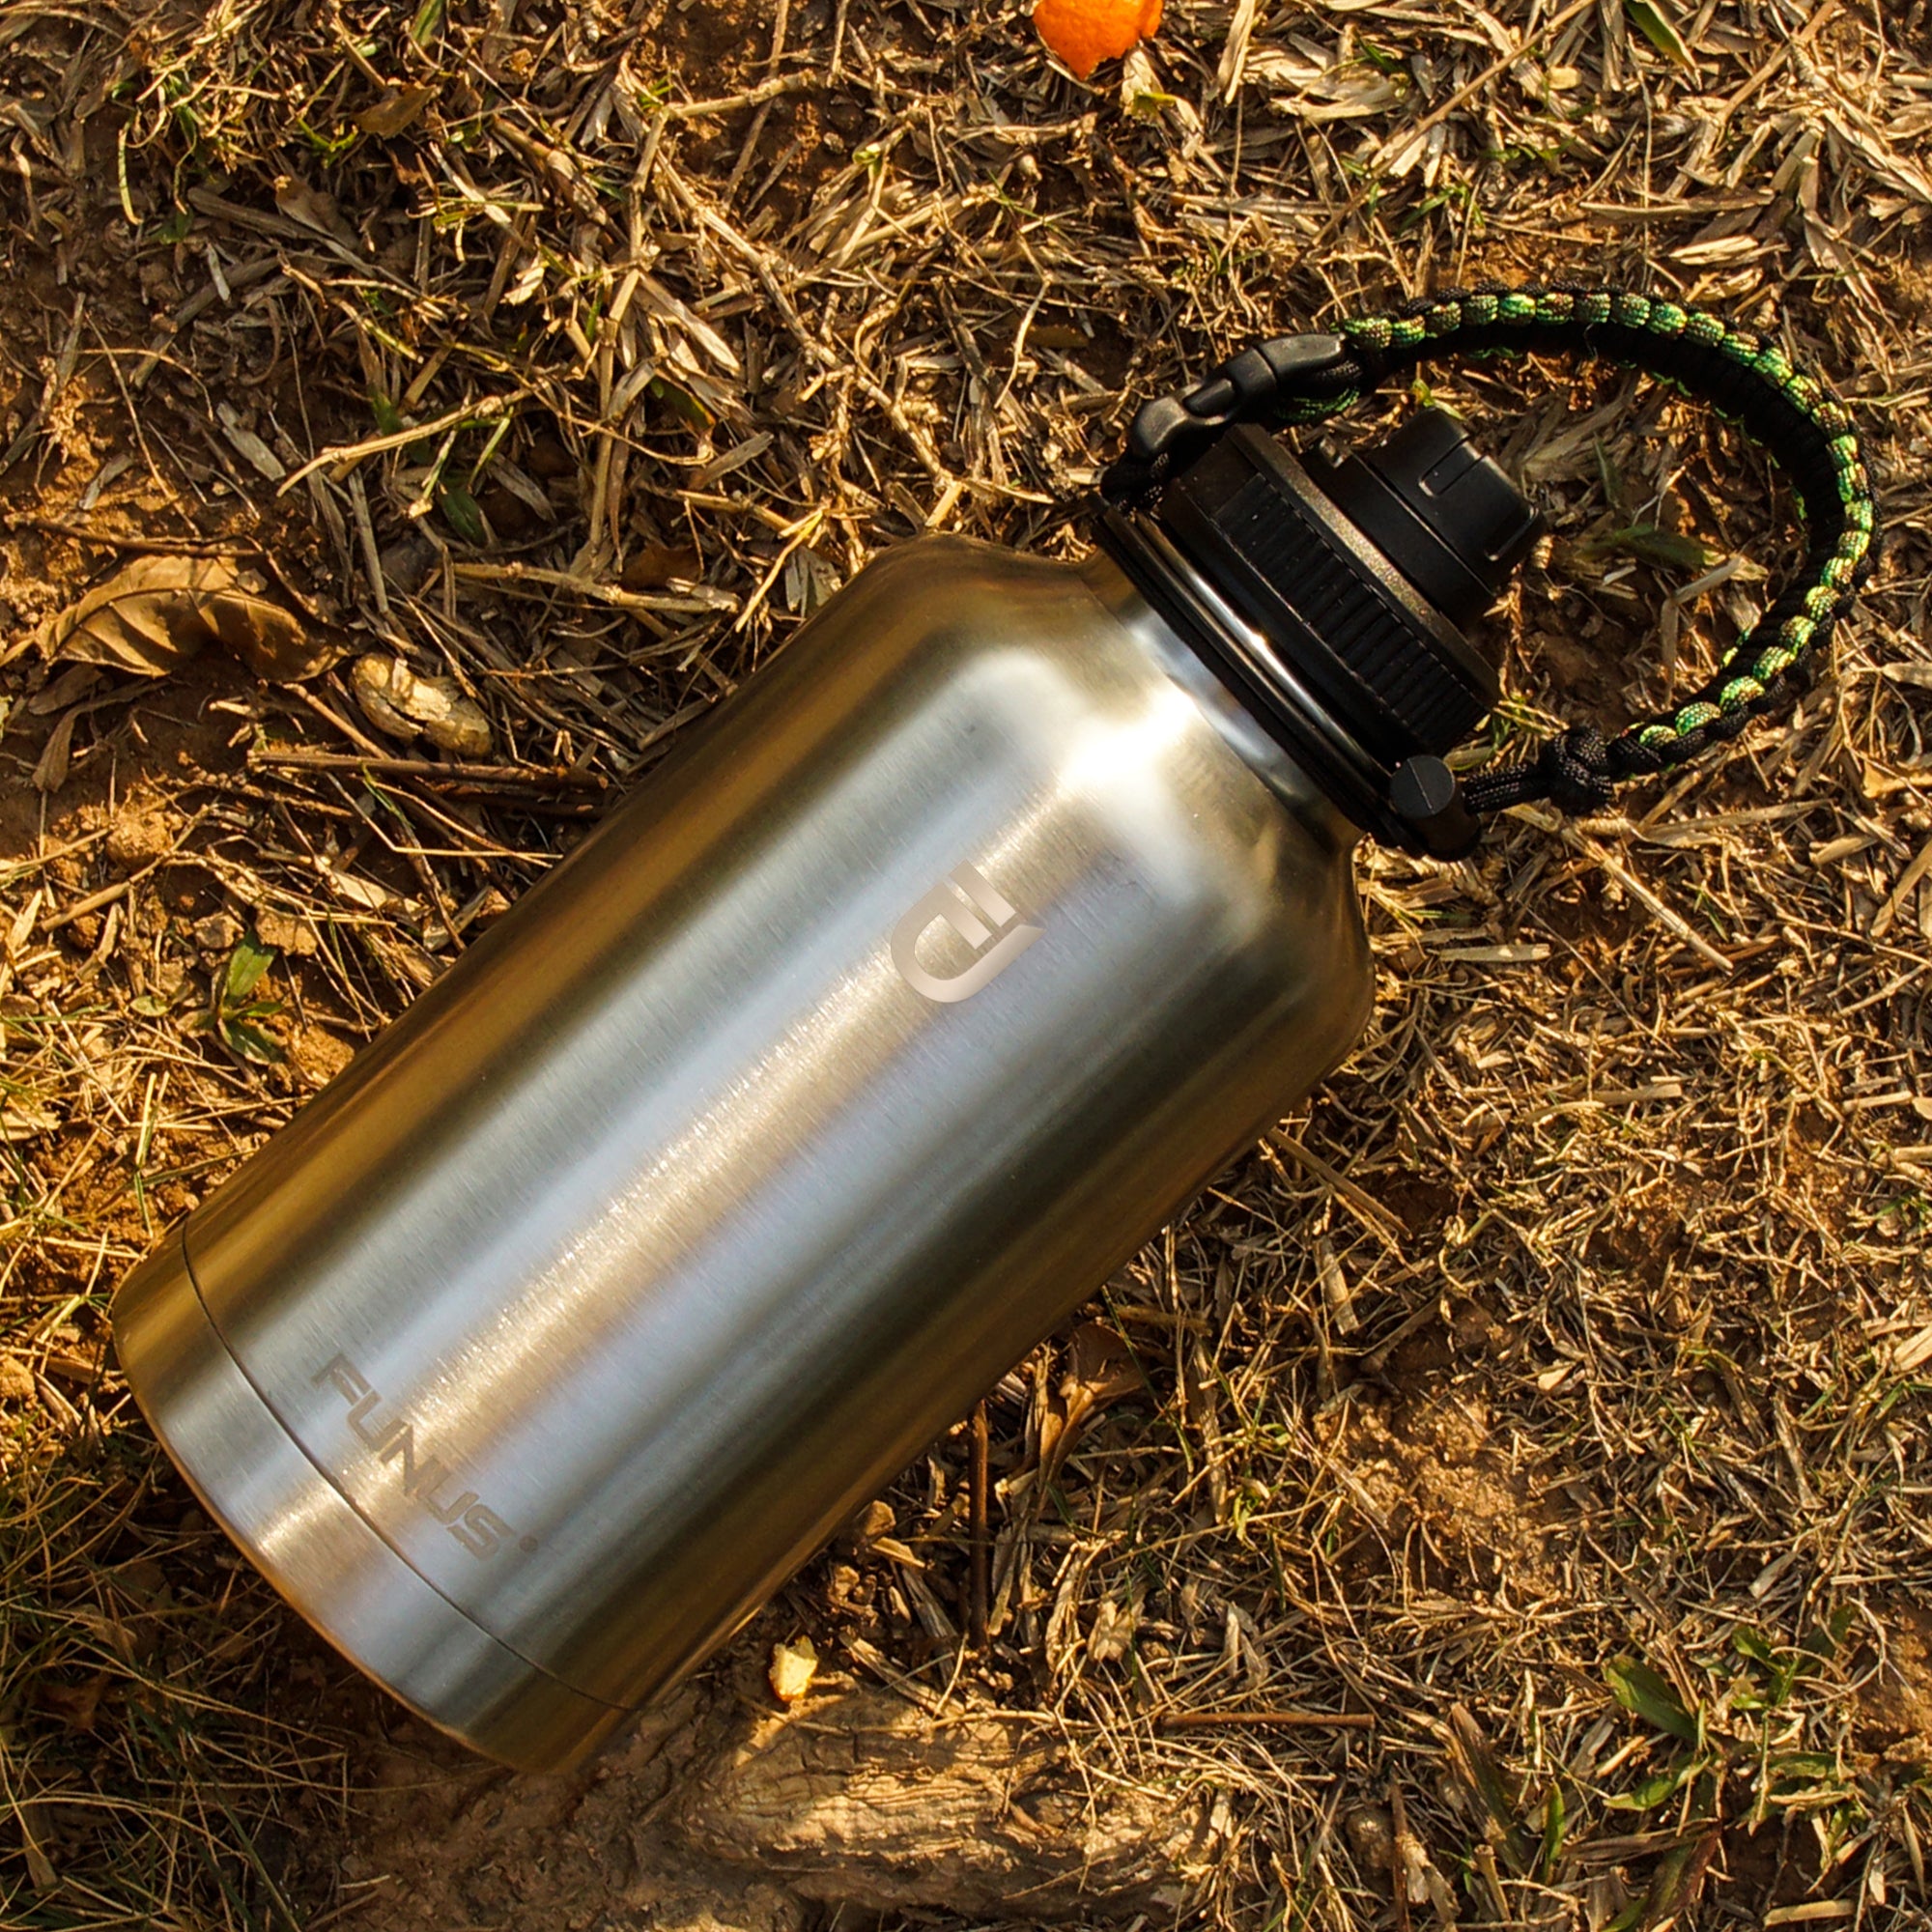 FUNUS 64oz Insulated Water Bottle With Carrier Bag & Paracord Handle F –  FUNUS WATER BOTTLE